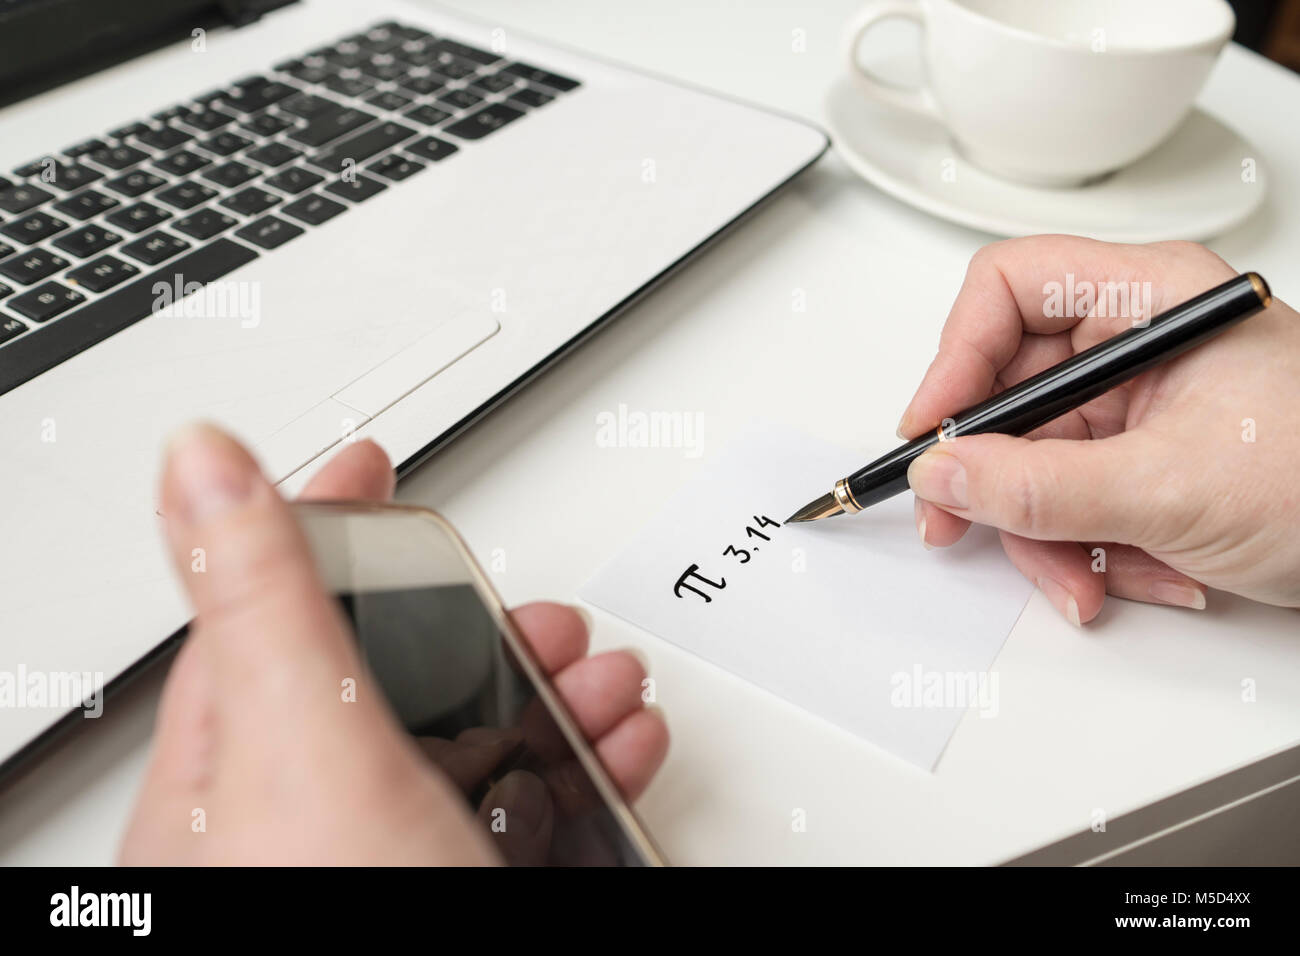 Happy Pi Day, written in black pen on white. On the desk a laptop, a cup, a hand holds the phone. Stock Photo